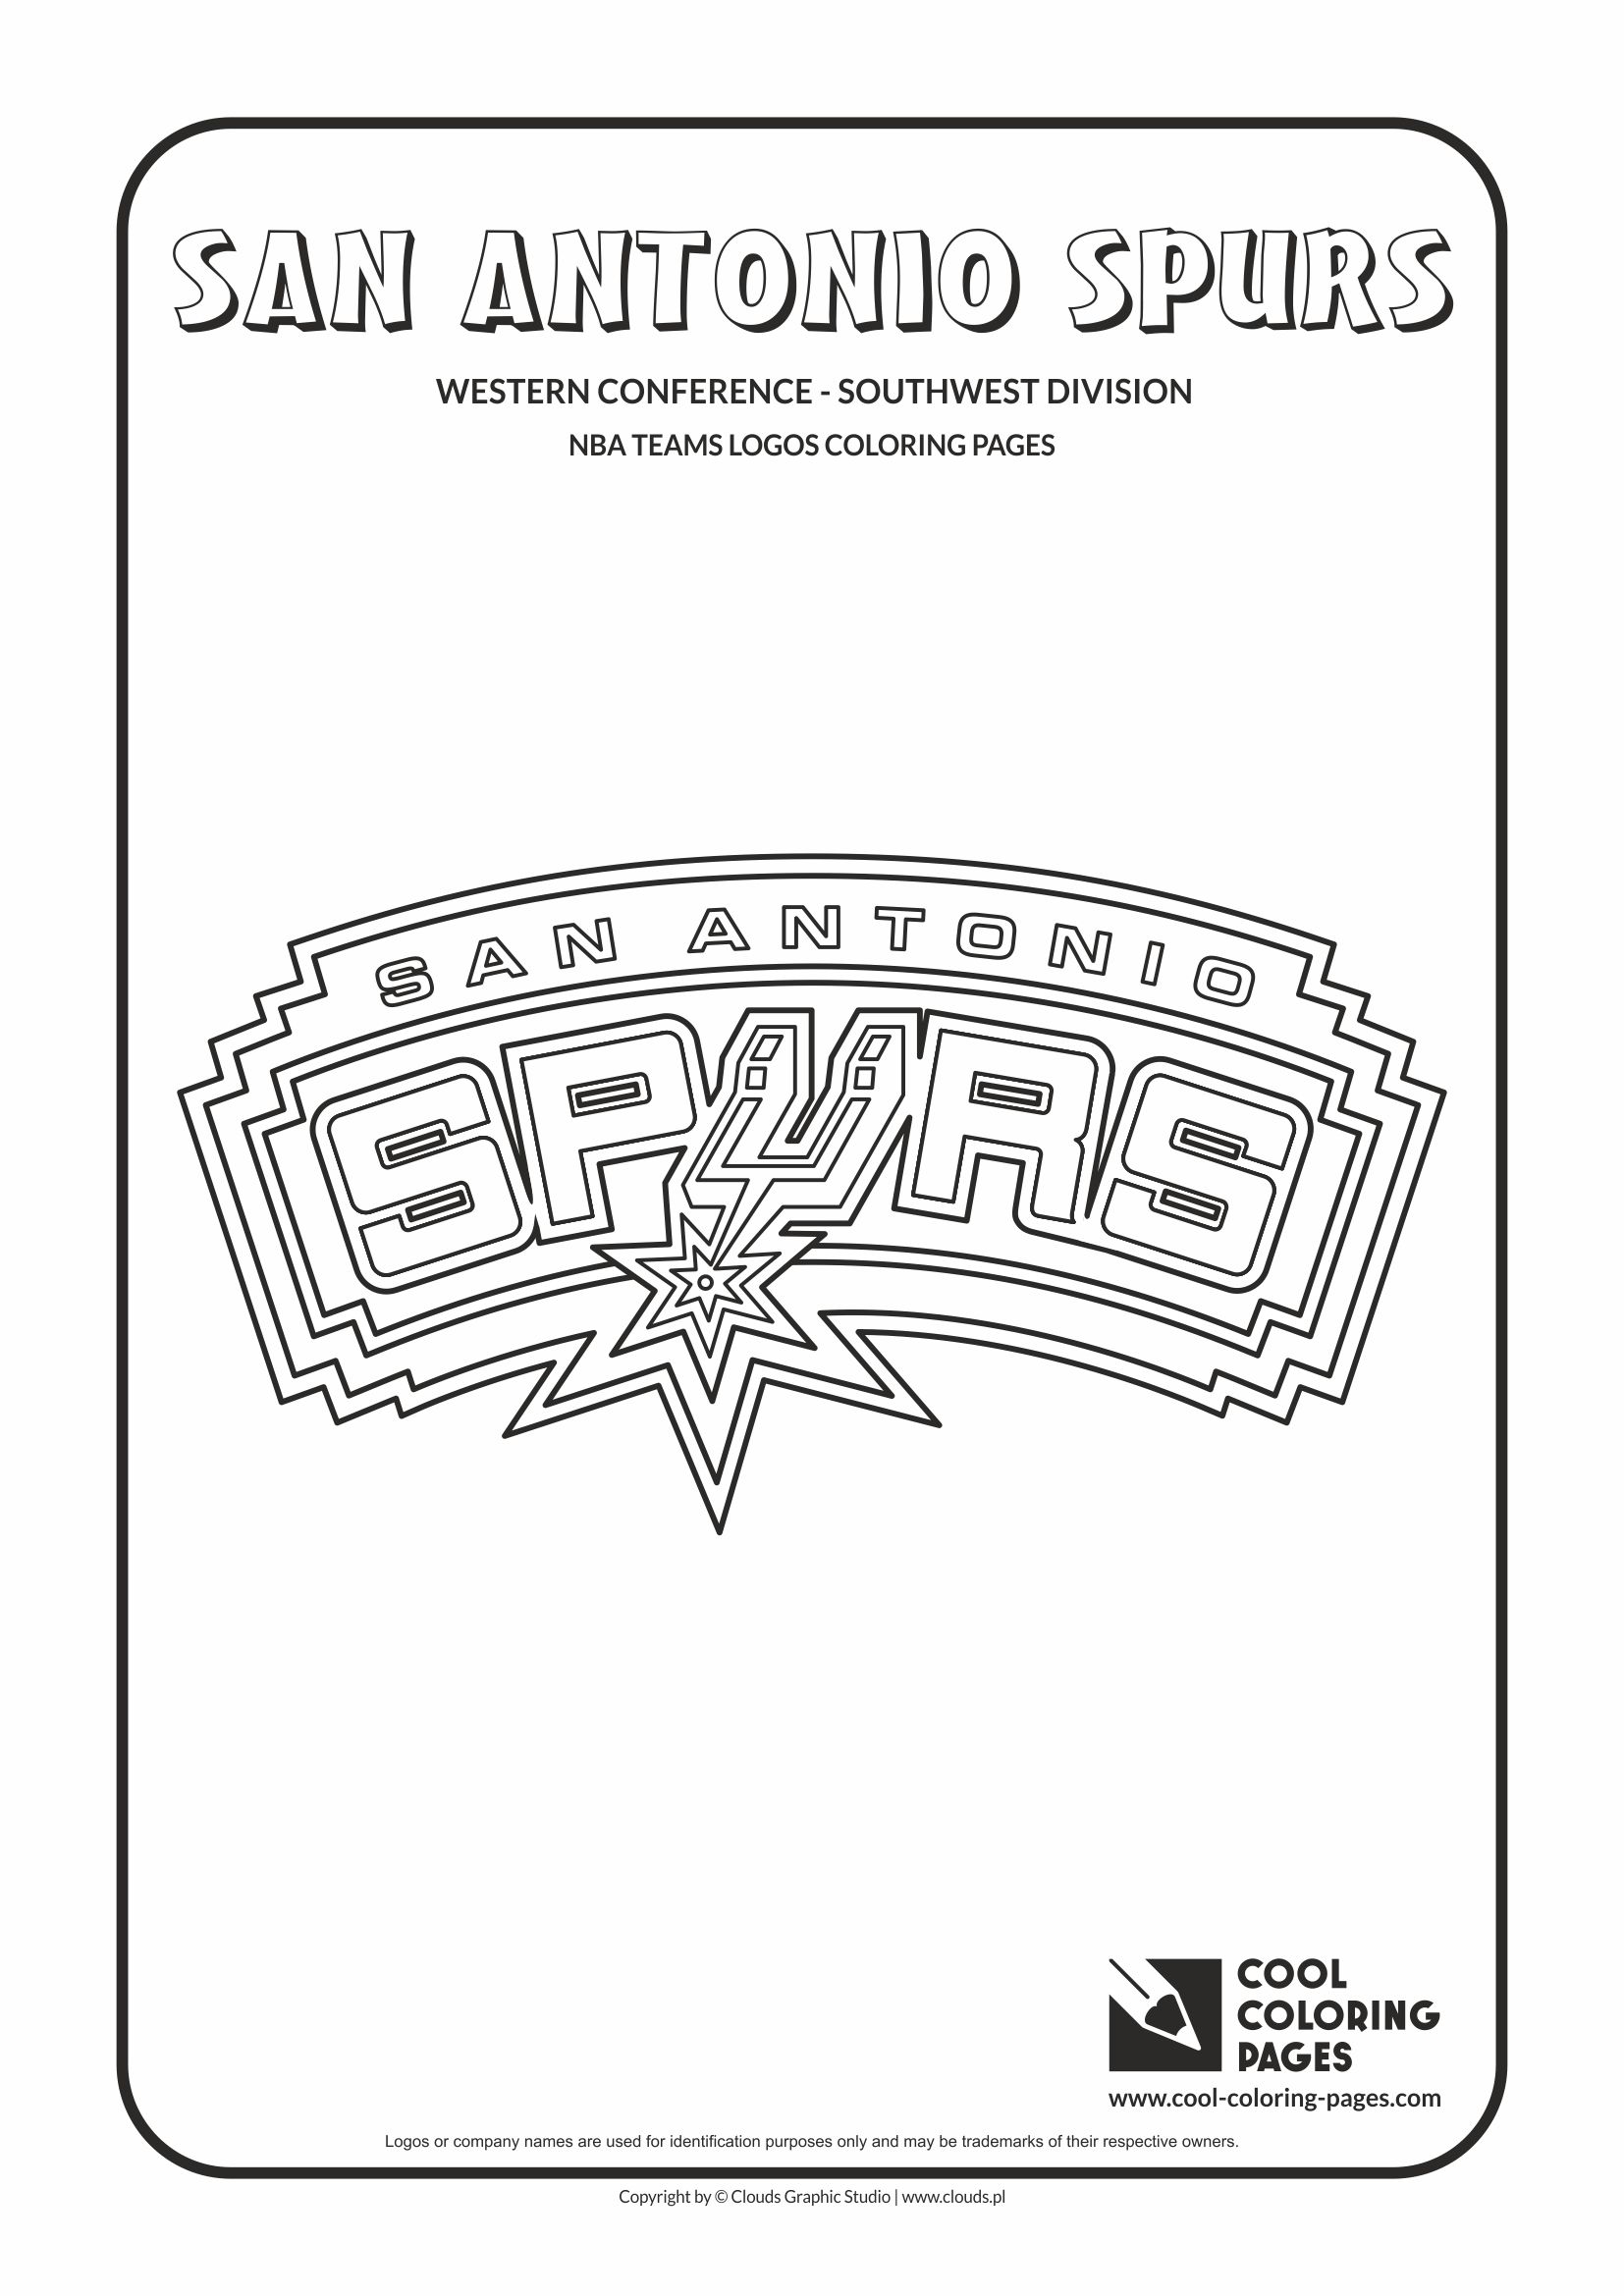 Cool Coloring Pages - NBA Basketball Clubs Logos - Western Conference - Southwest Division / San Antonio Spurs logo / Coloring page with San Antonio Spurs logo